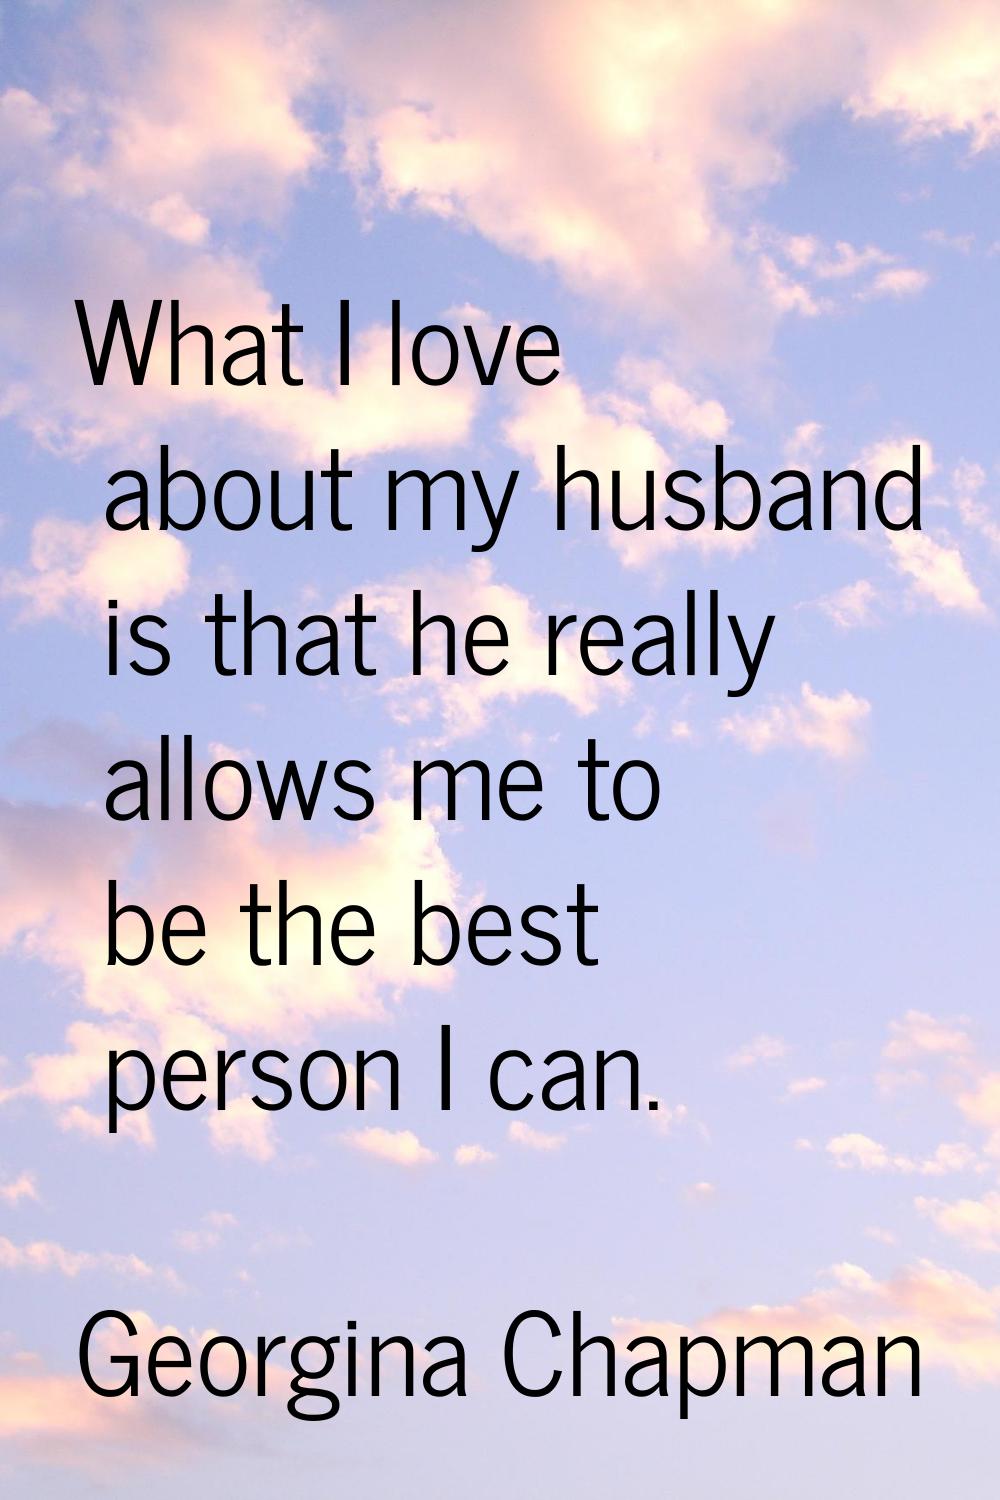 What I love about my husband is that he really allows me to be the best person I can.